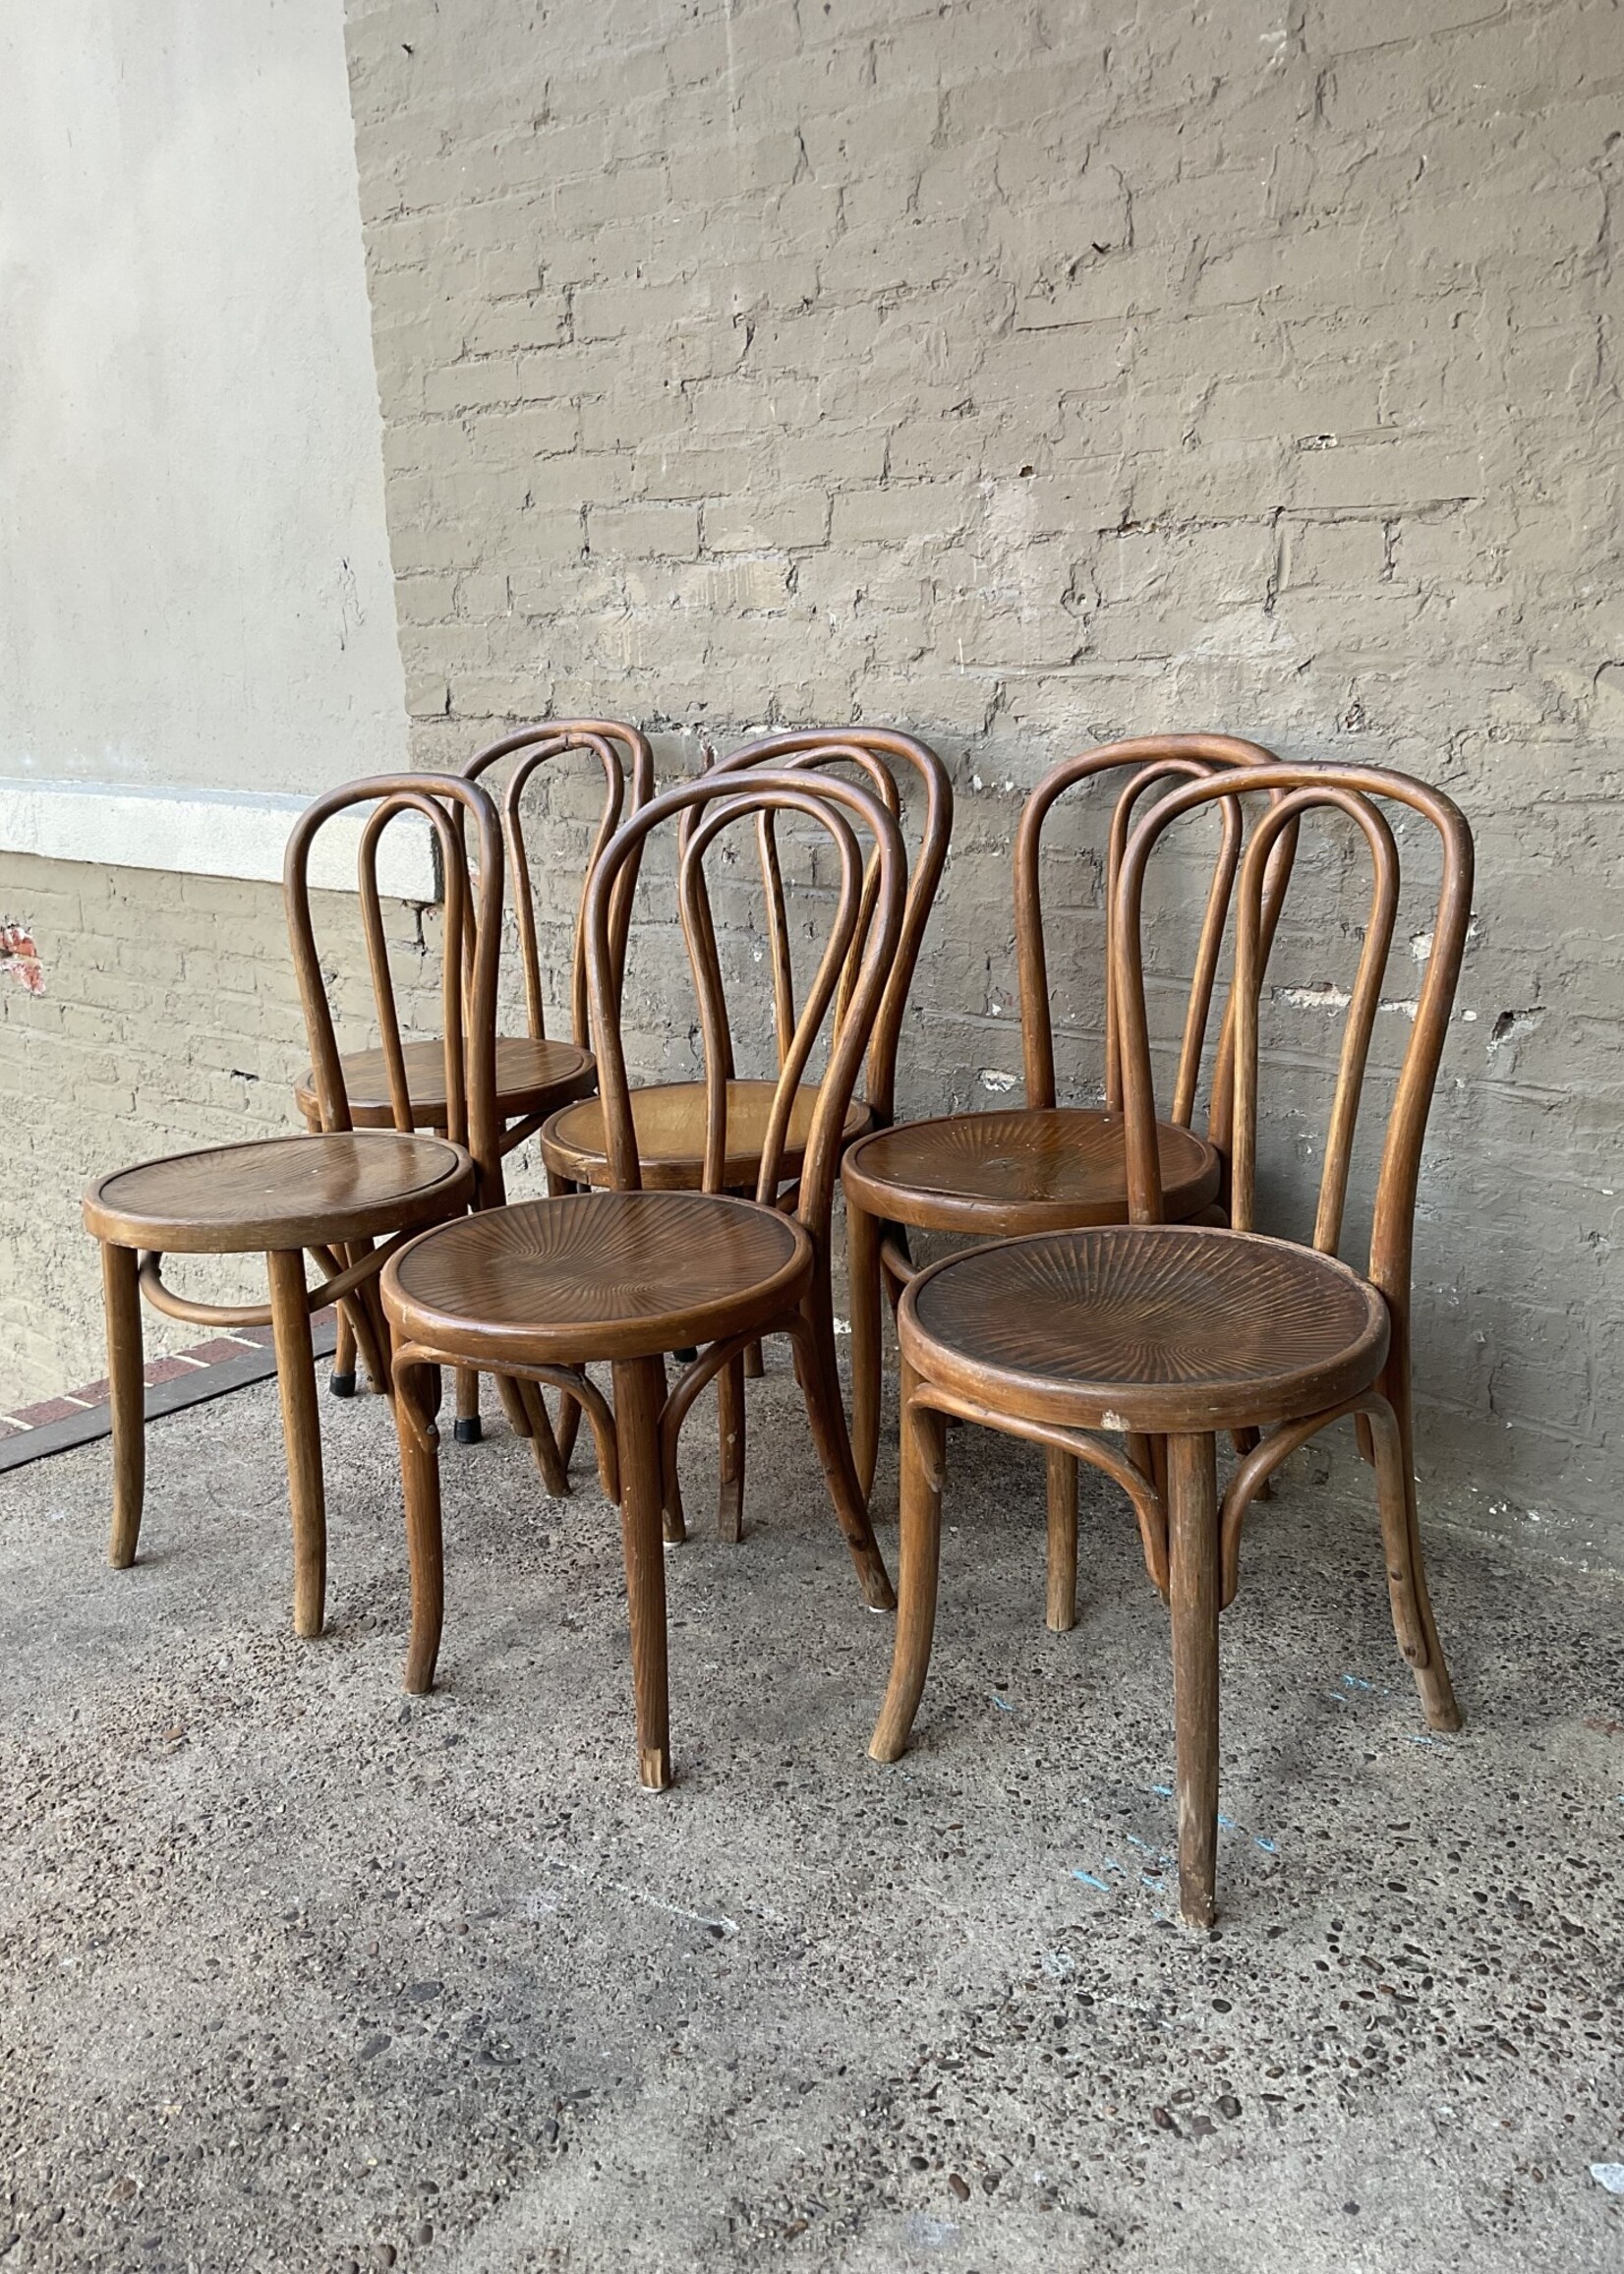 GOODWOOD Set of 6 Bentwood Chairs, Some Repairs